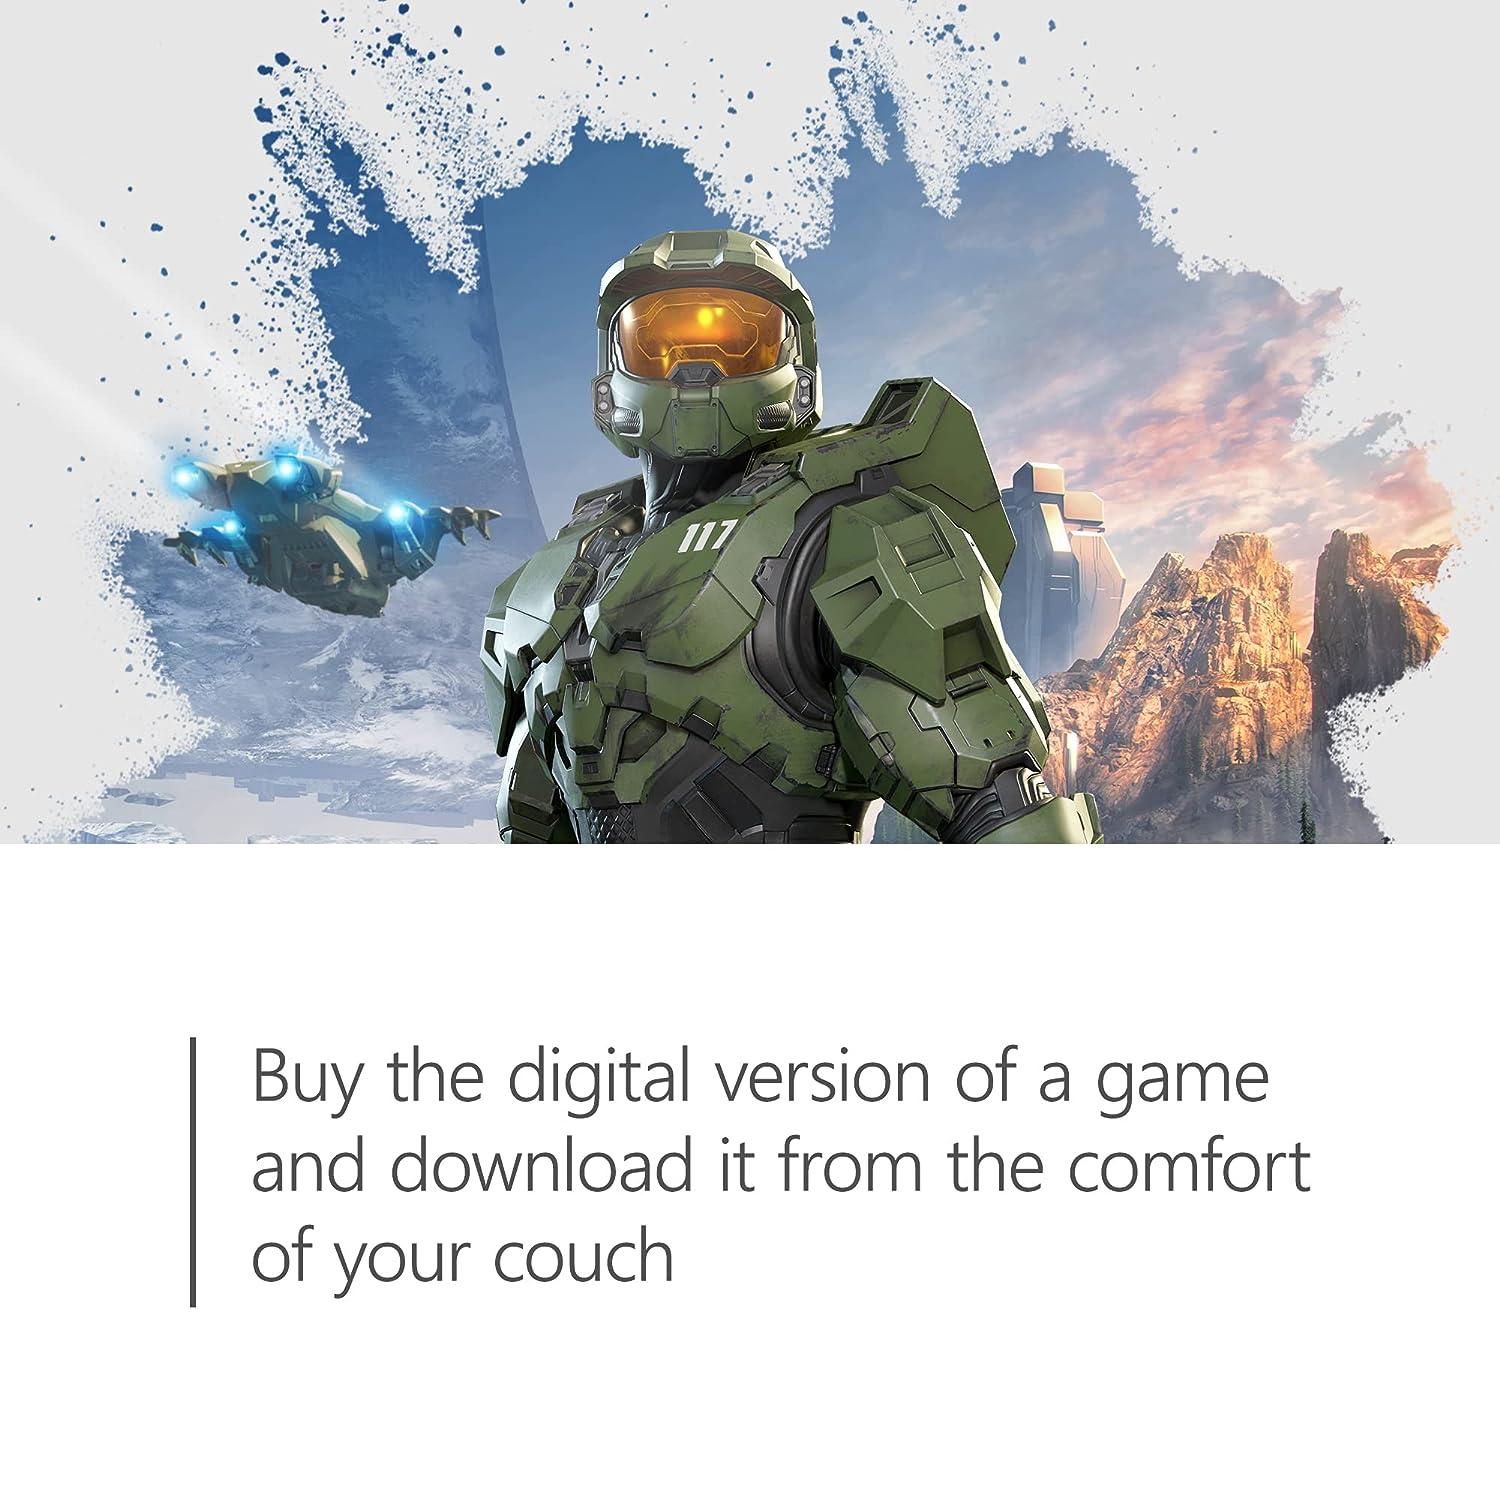 $10 Xbox Digital Gift Card | Buy the digital version of a game and download it from the comfort of your couch.